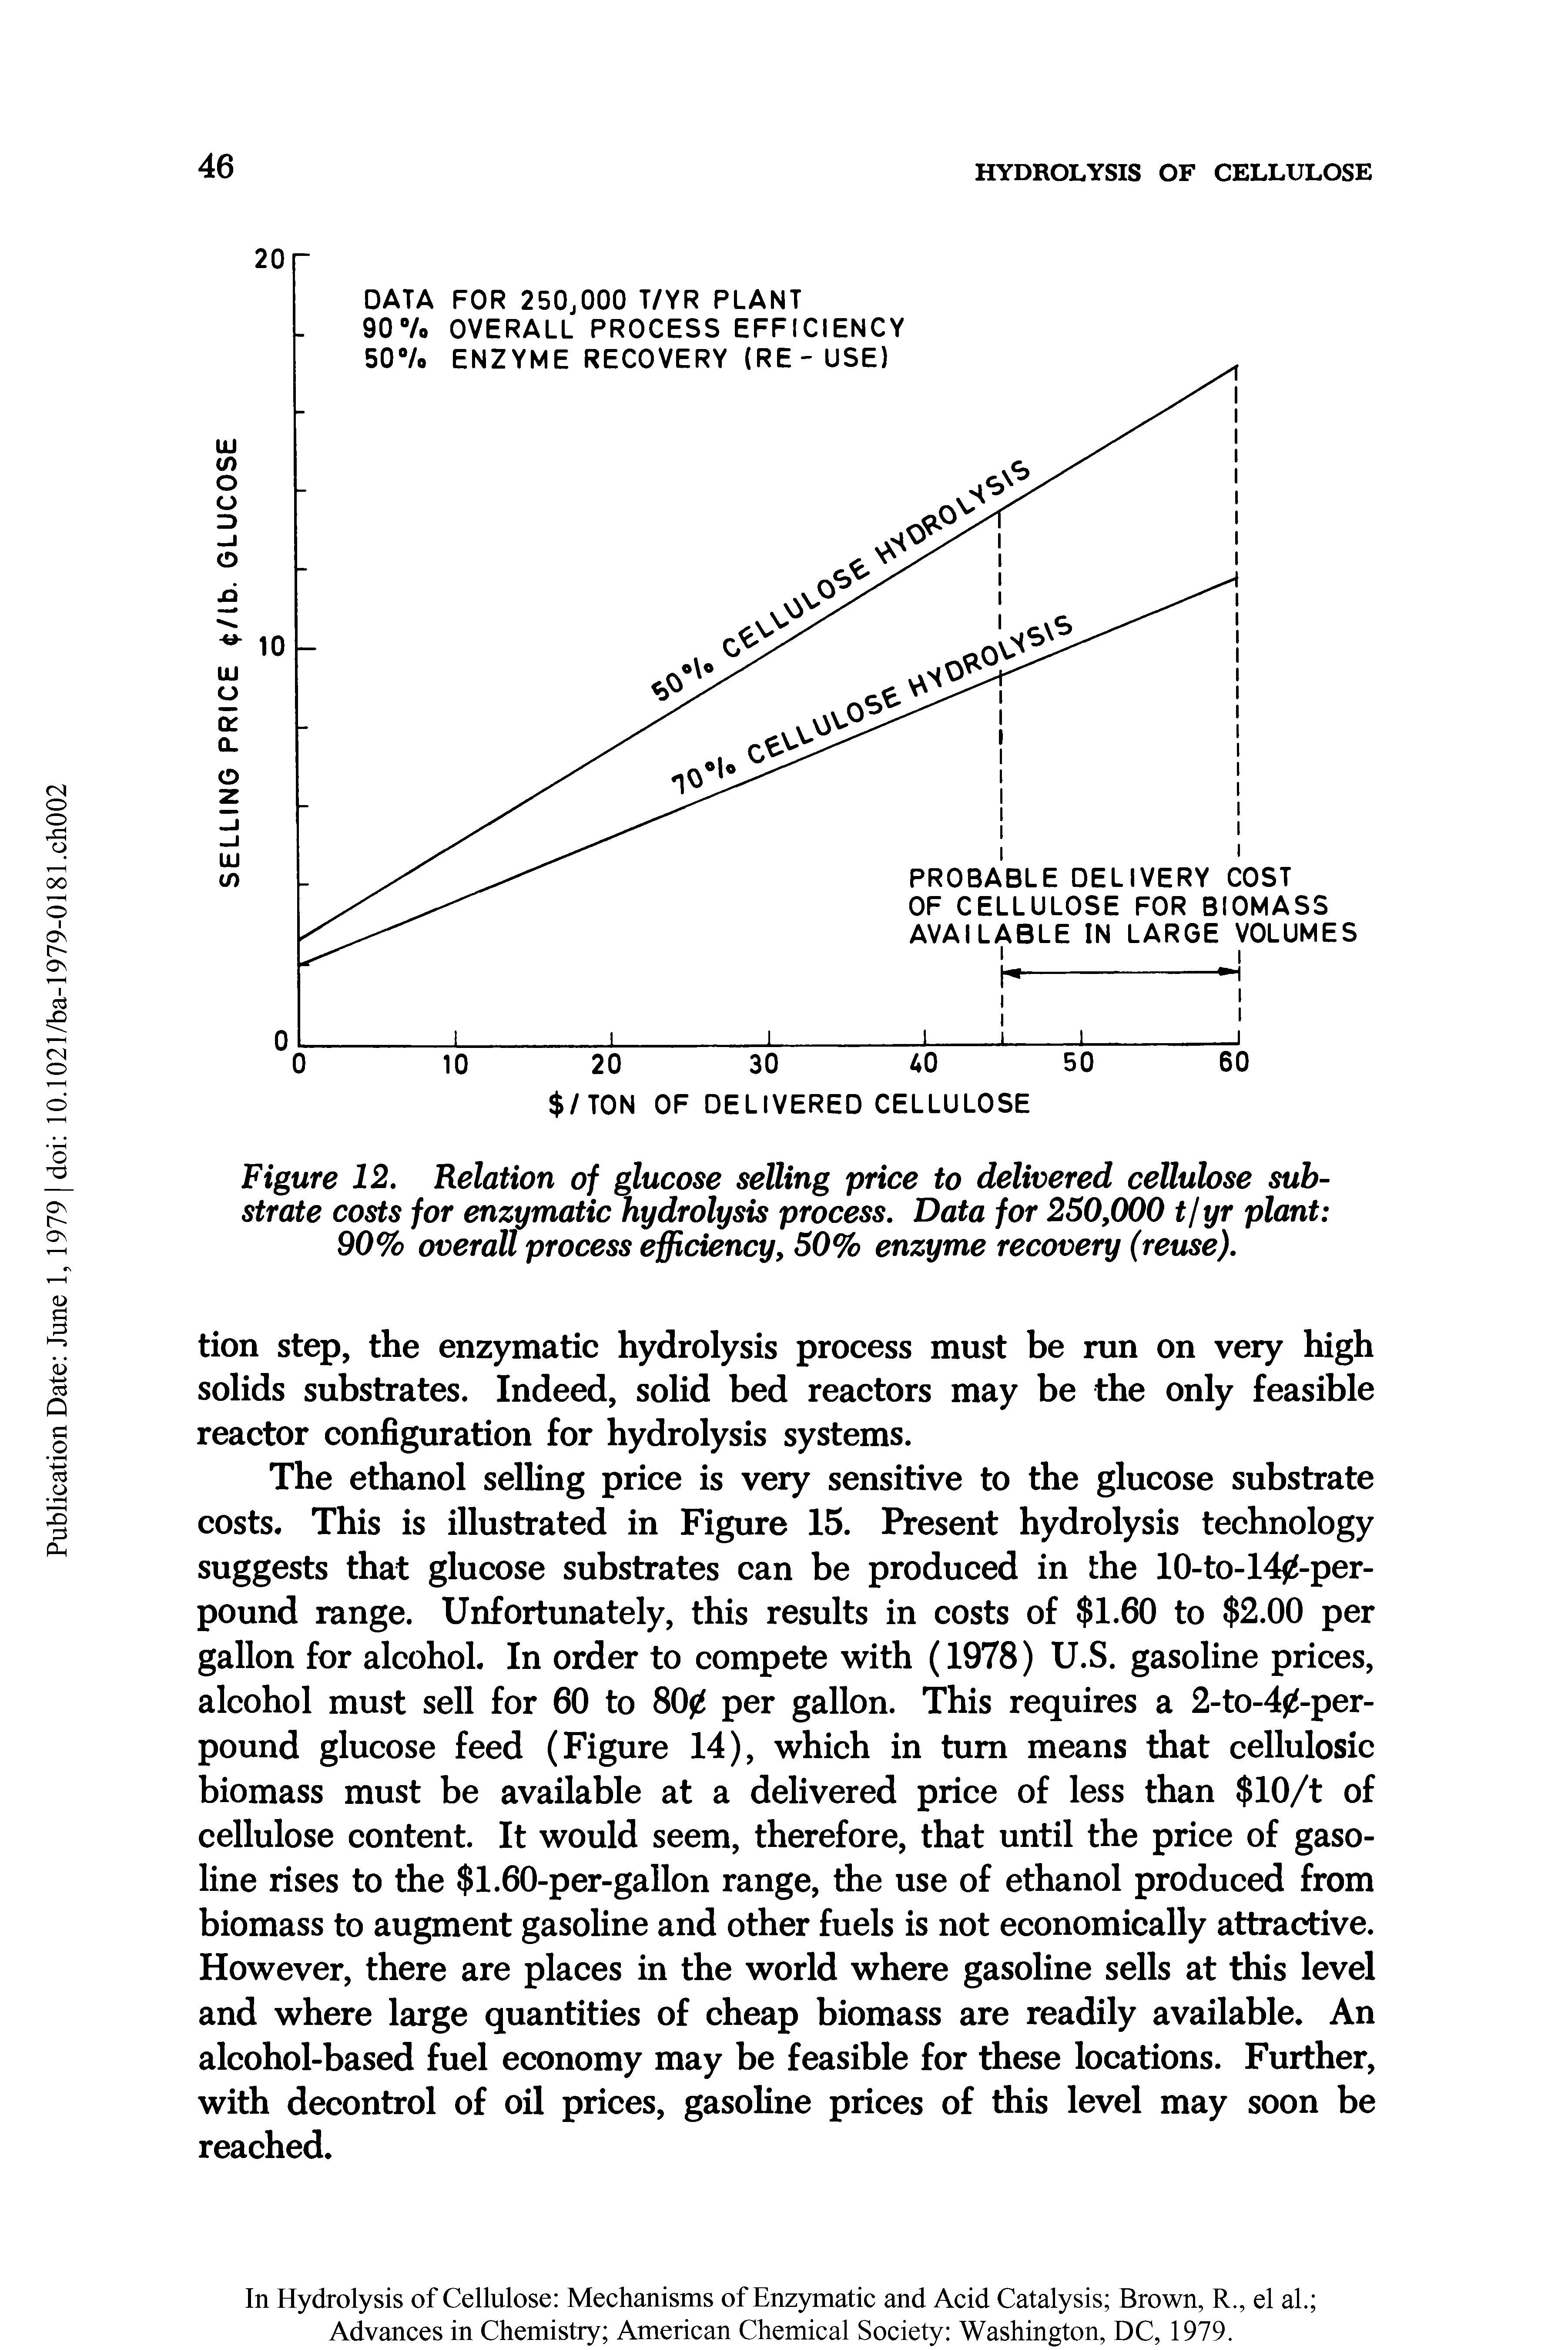 Figure 12. Relation of glucose selling price to delivered cellulose substrate costs for enzymatic hydrolysis process. Data for 250,000 t/yr plant 90% overall process efficiency, 50% enzyme recovery (reuse).